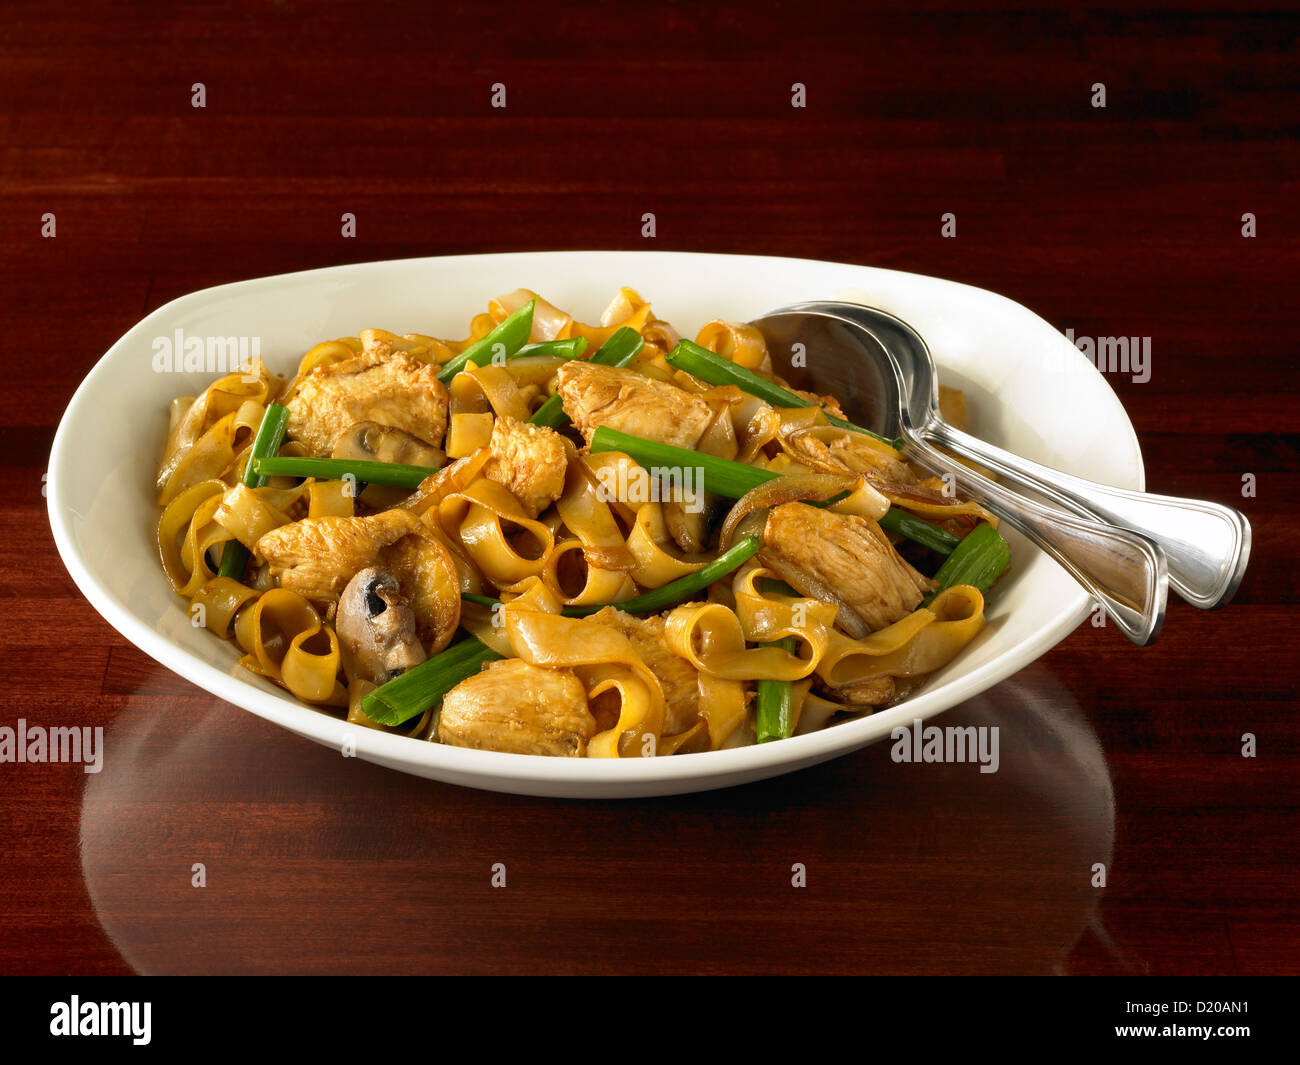 Chicken chow fun noodles Stock Photo